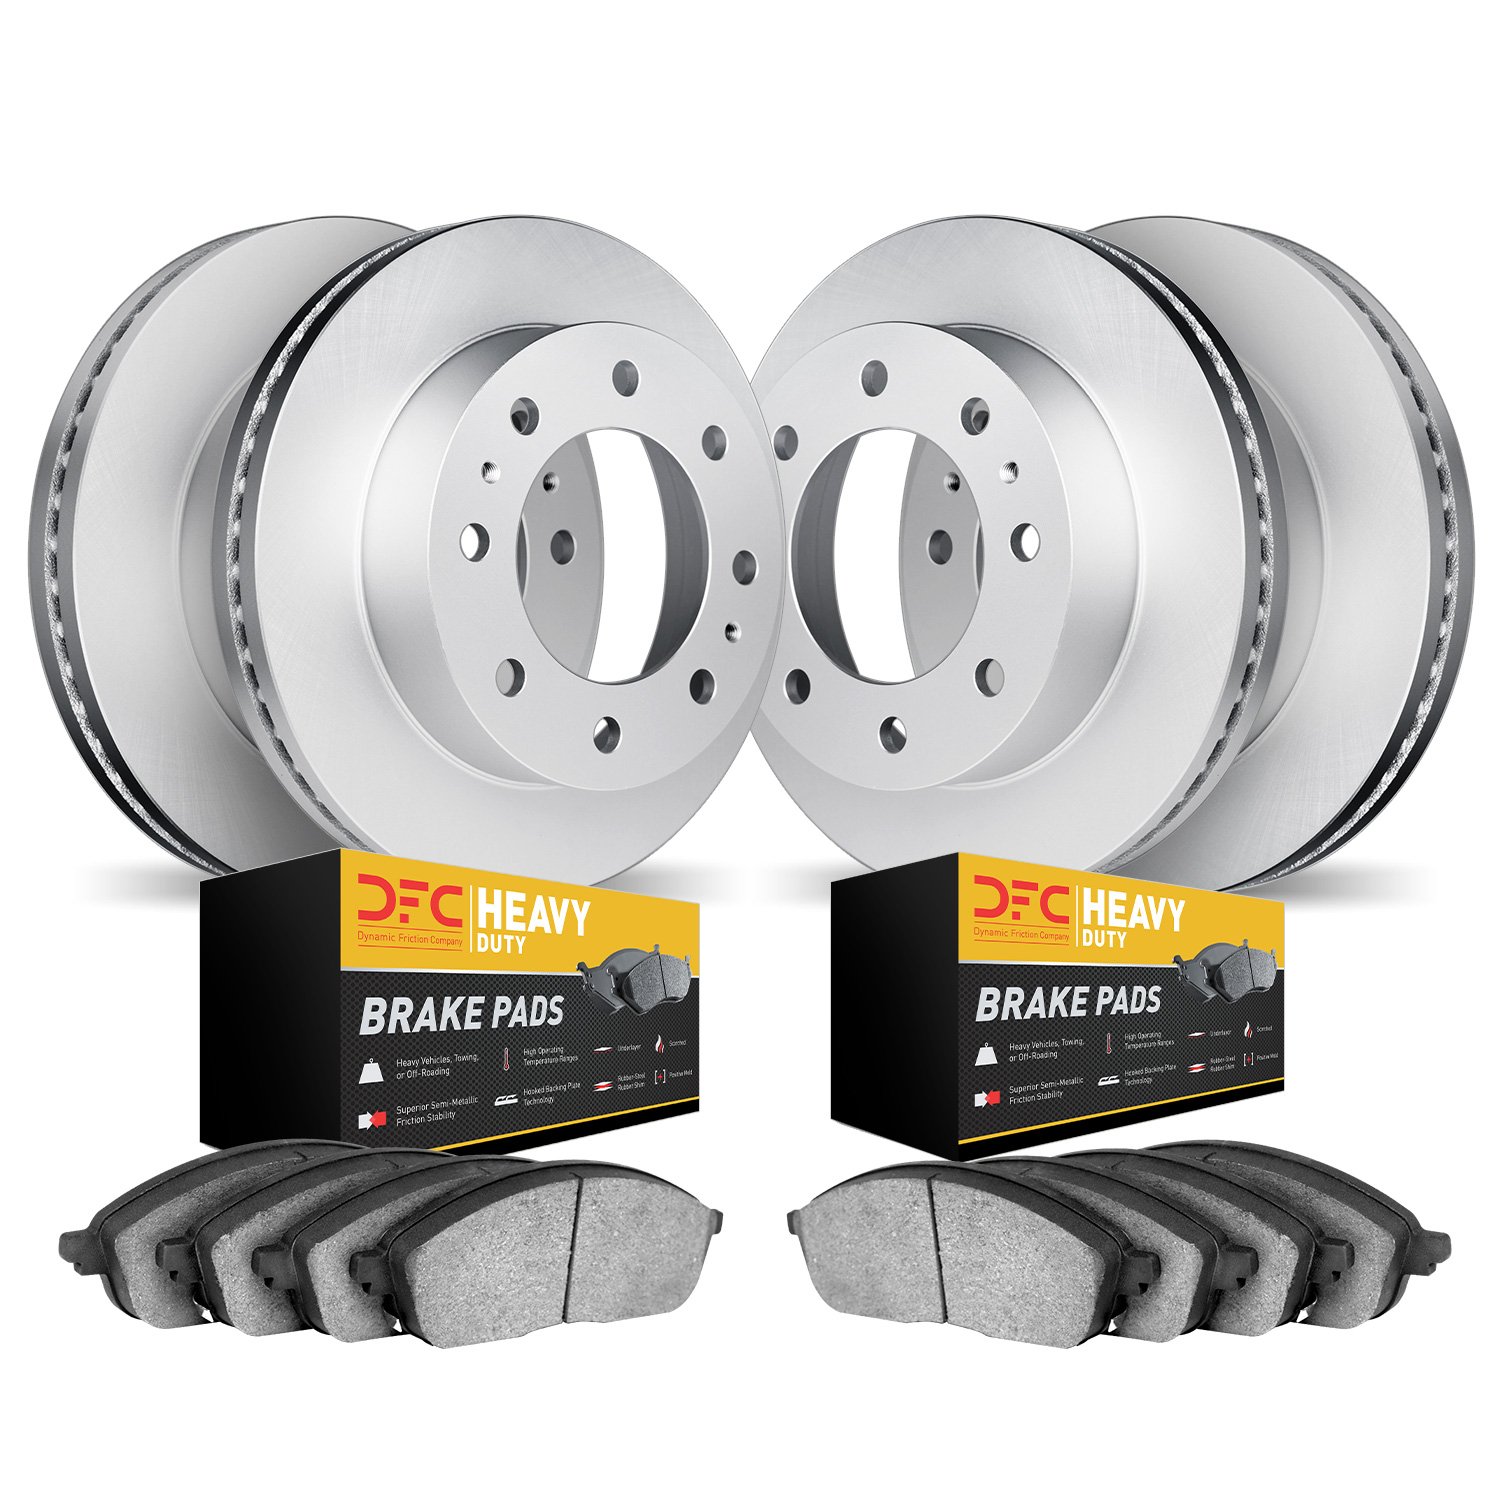 4204-54092 Geospec Brake Rotors w/Heavy-Duty Brake Pads Kit, Fits Select Ford/Lincoln/Mercury/Mazda, Position: Front and Rear